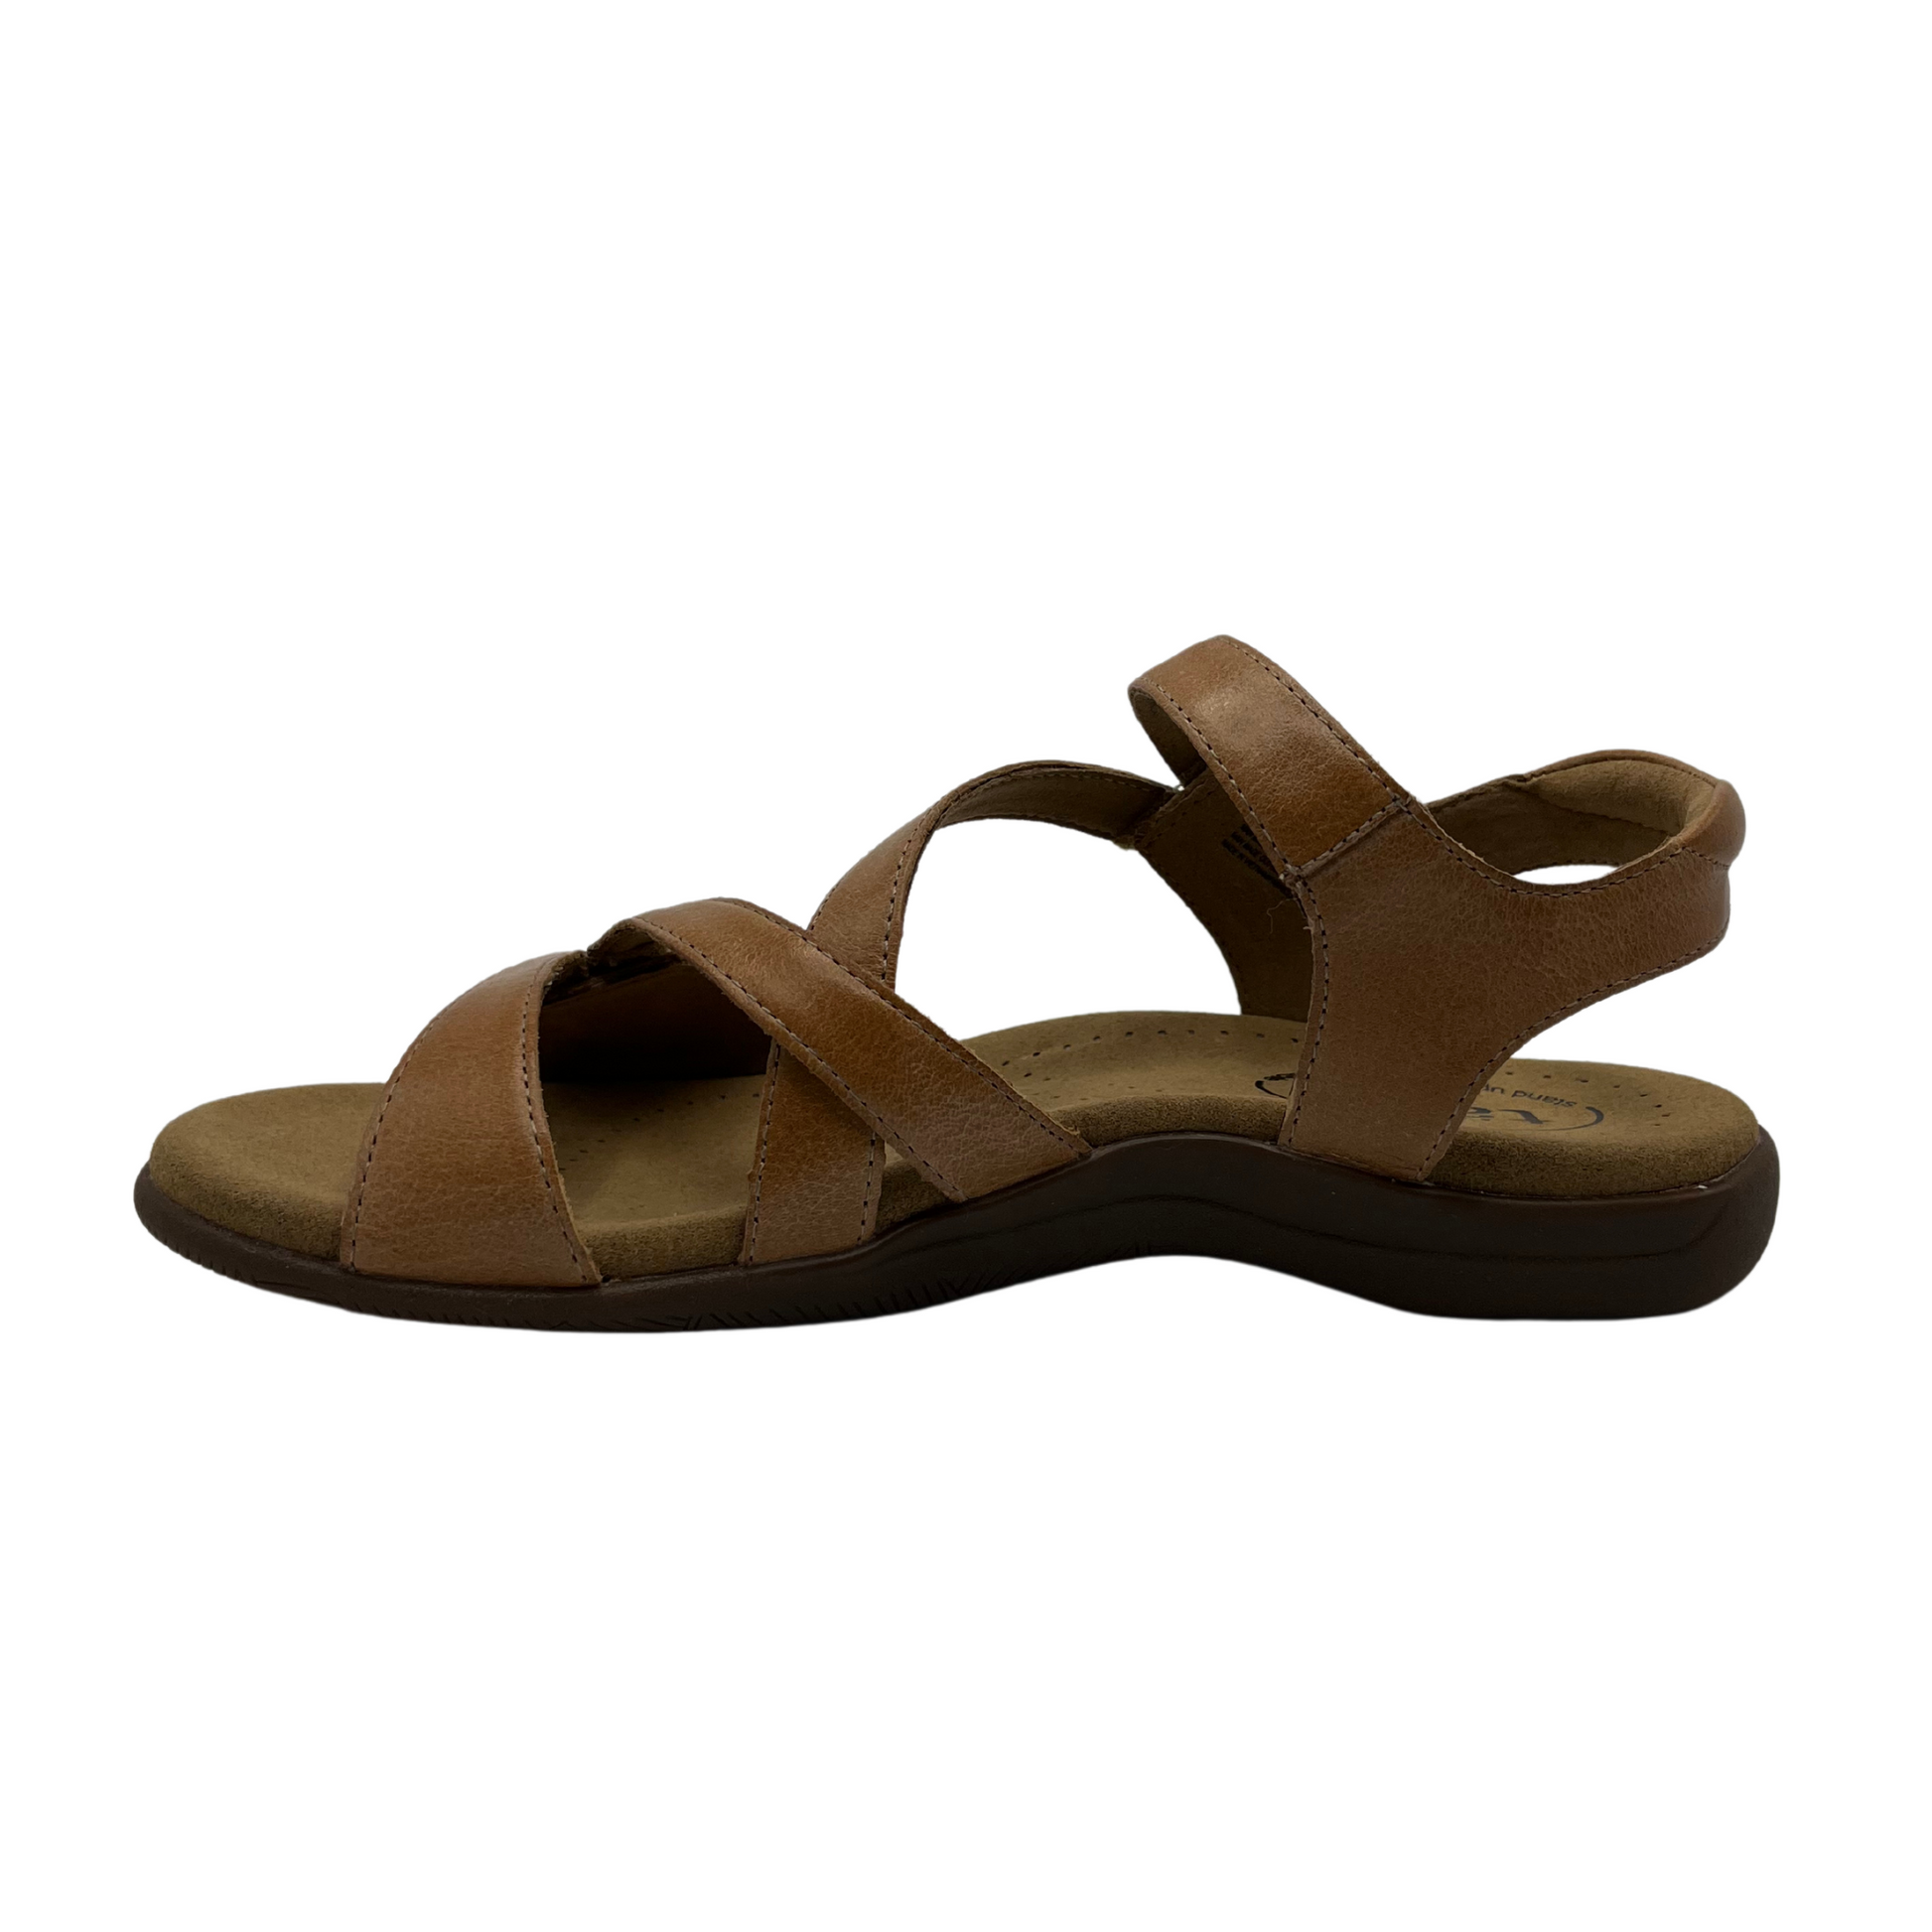 Left facing view of brown leather sandal with anatomical footbed, adjustable velcro straps and open toe